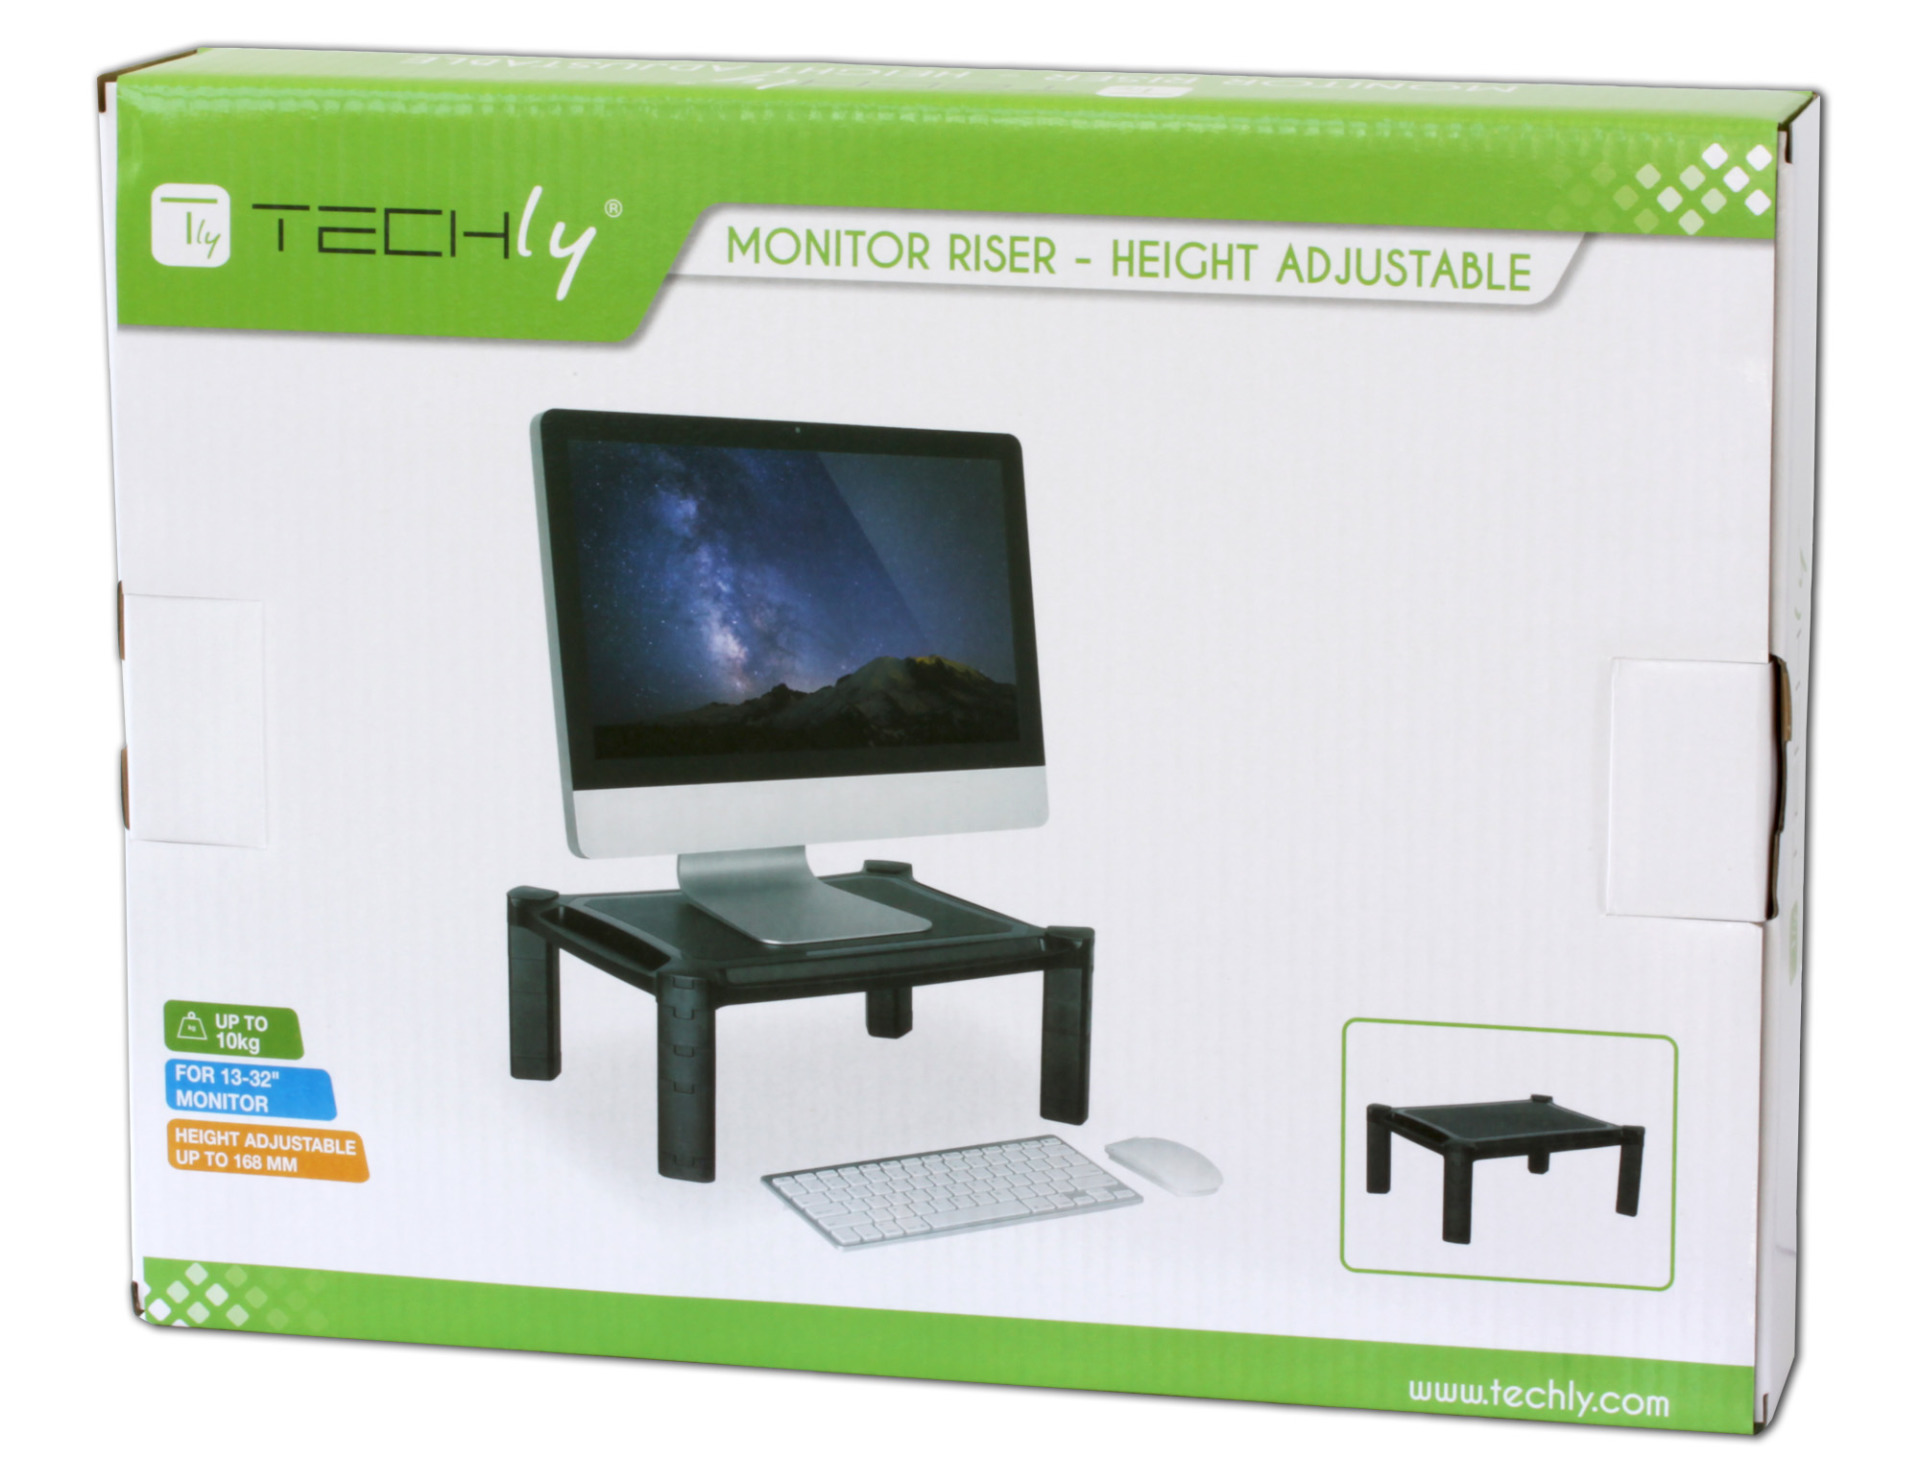 Height adjustable stand for devices or LCDs 13’’-32’’